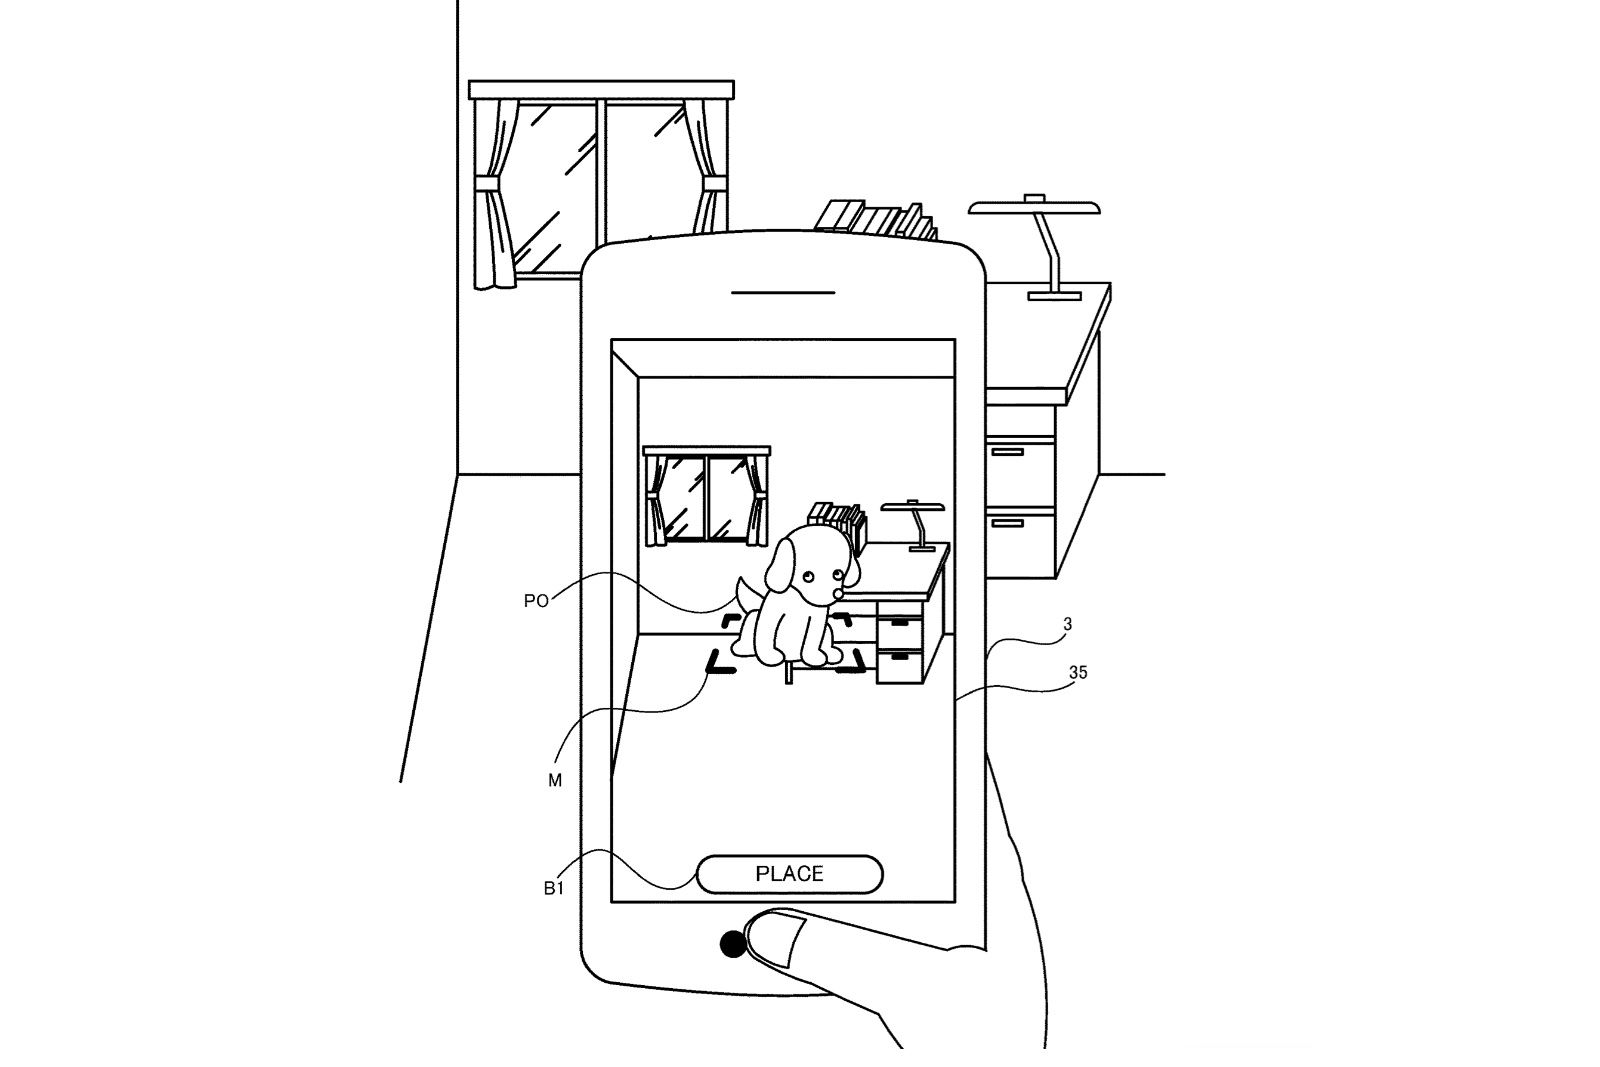 Patent drawing showing a virtual dog on a phone